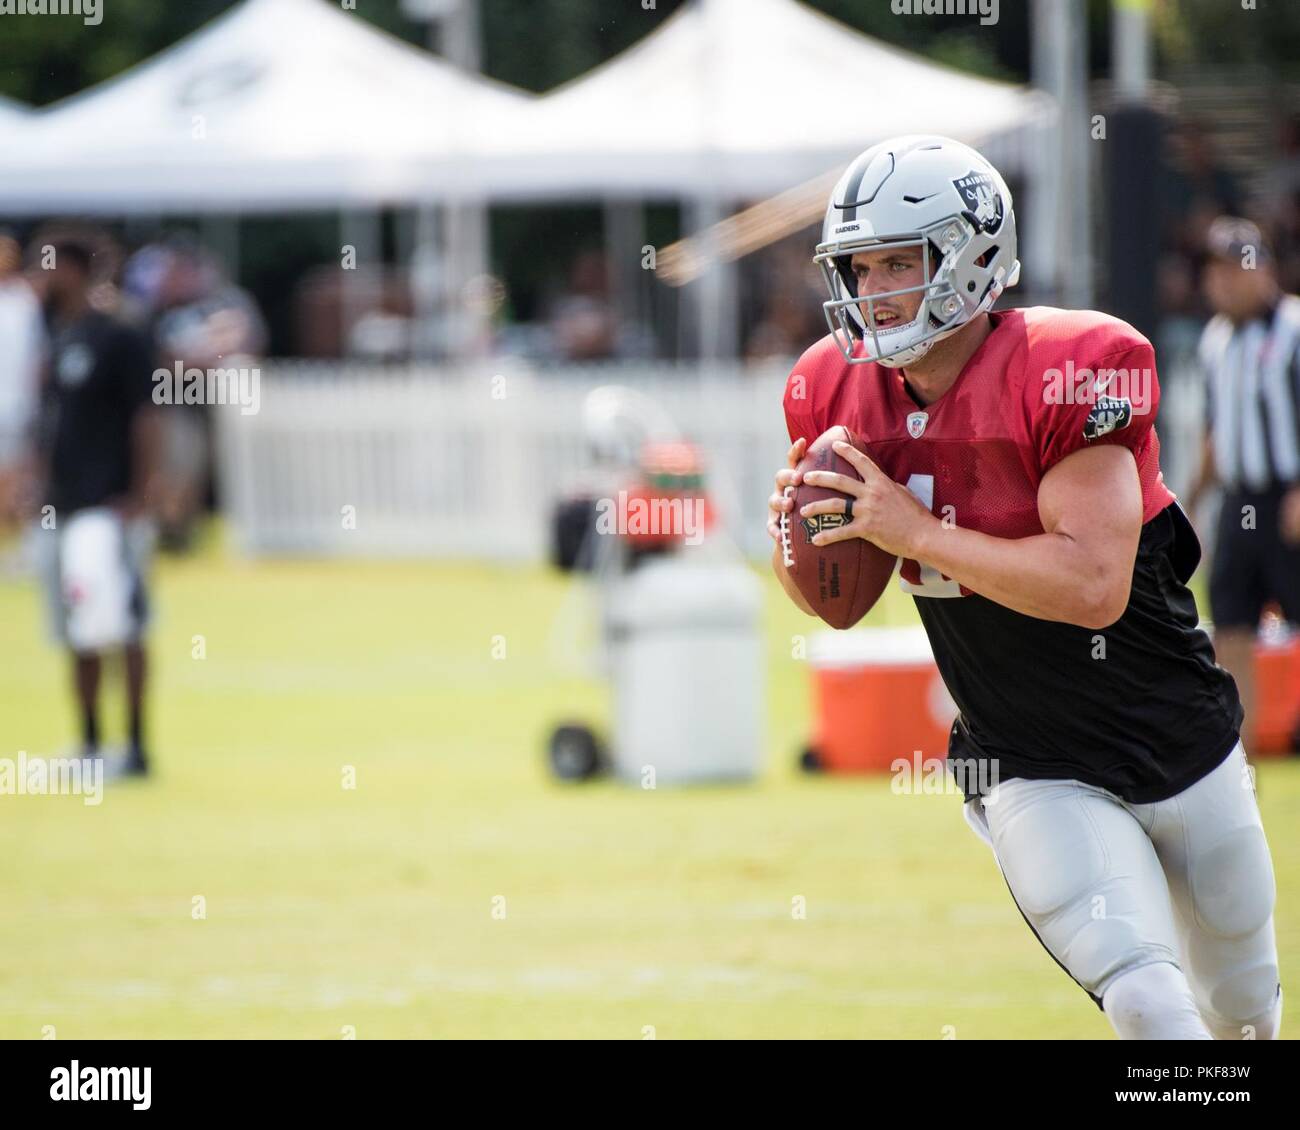 Oakland Raiders Quarterback Derek Carr throws a pass during practice at their training facility in Napa Valley, Calif., August 7, 2018. The Raiders invited Travis Air Force Base Airmen to attend camp and were treated to a scrimmage between the Raiders and Detroit Lions and a meet and greet autograph session with players and coaches from both teams. Stock Photo